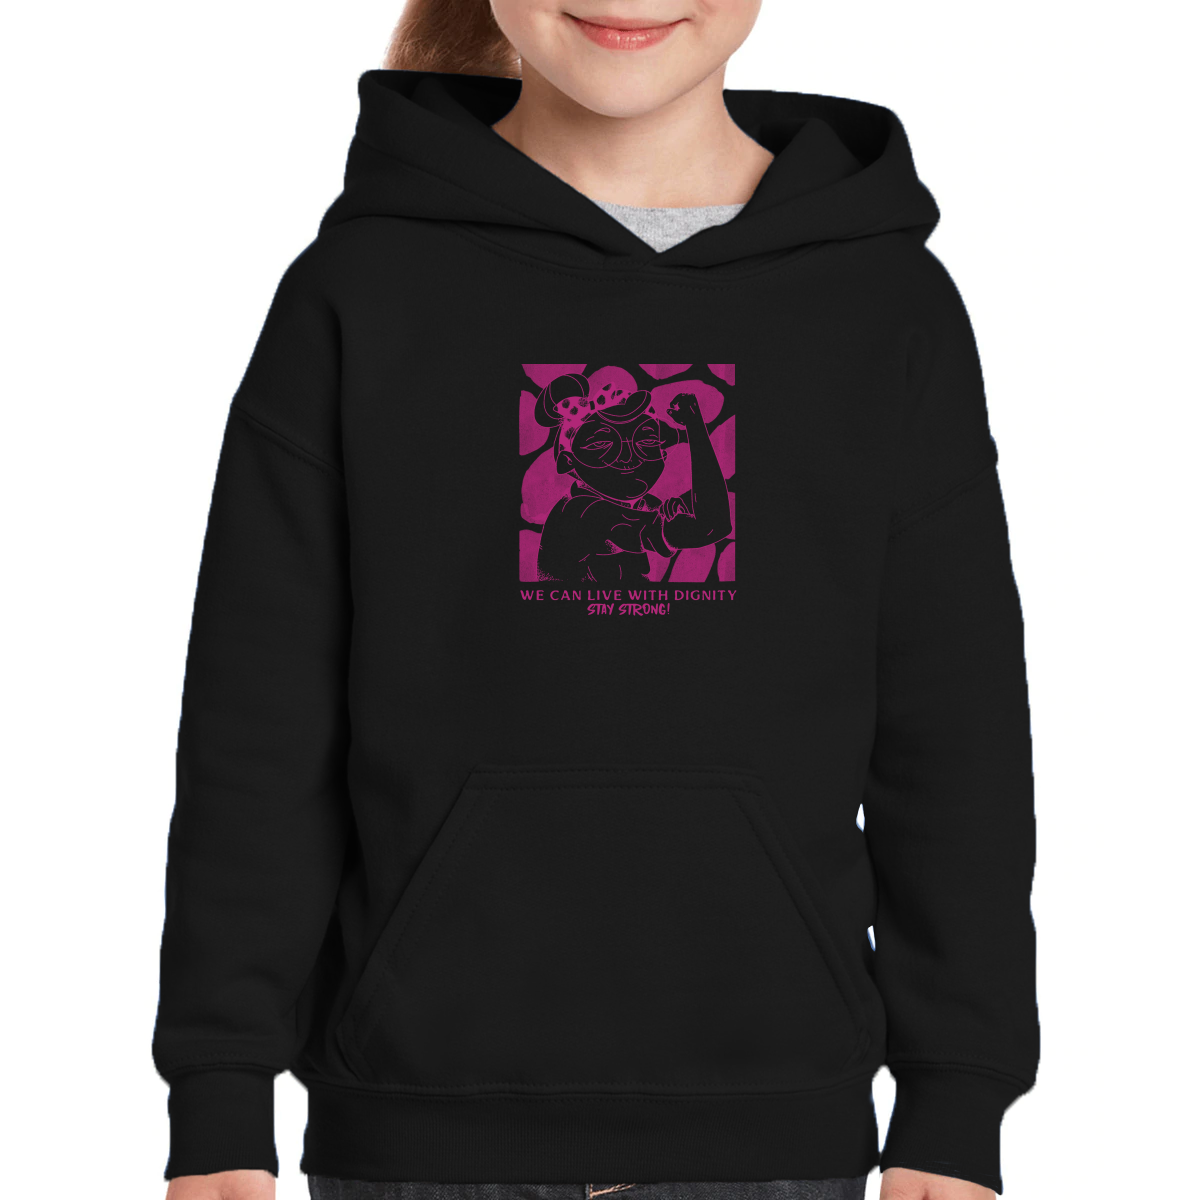 We can live with dignity STAY STRONG! Kids Hoodie | Black